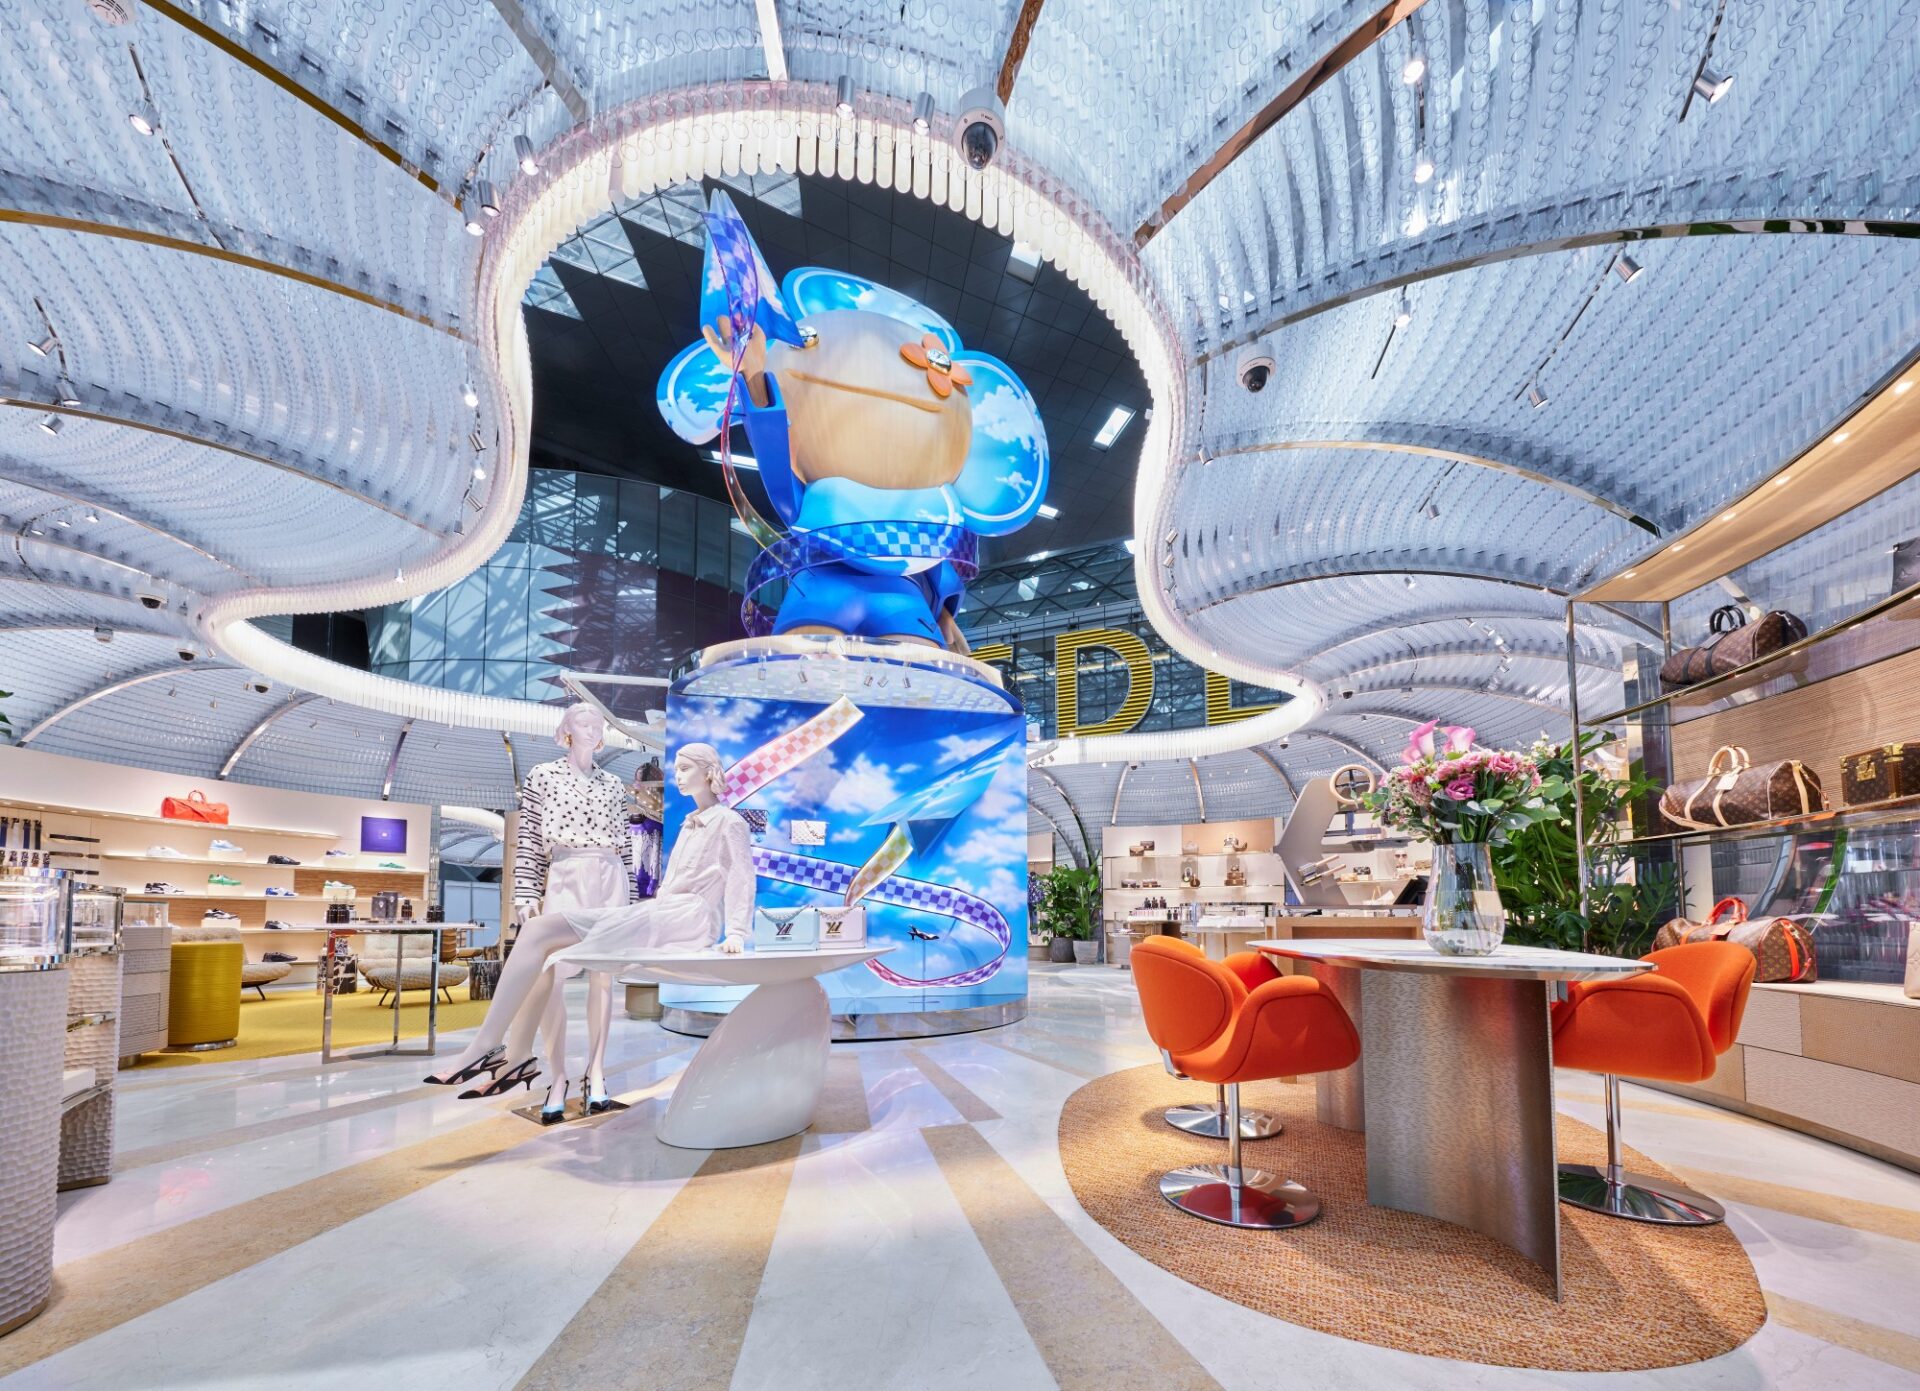 Louis Vuitton's first lounge in an airport has opened in Doha - Domus